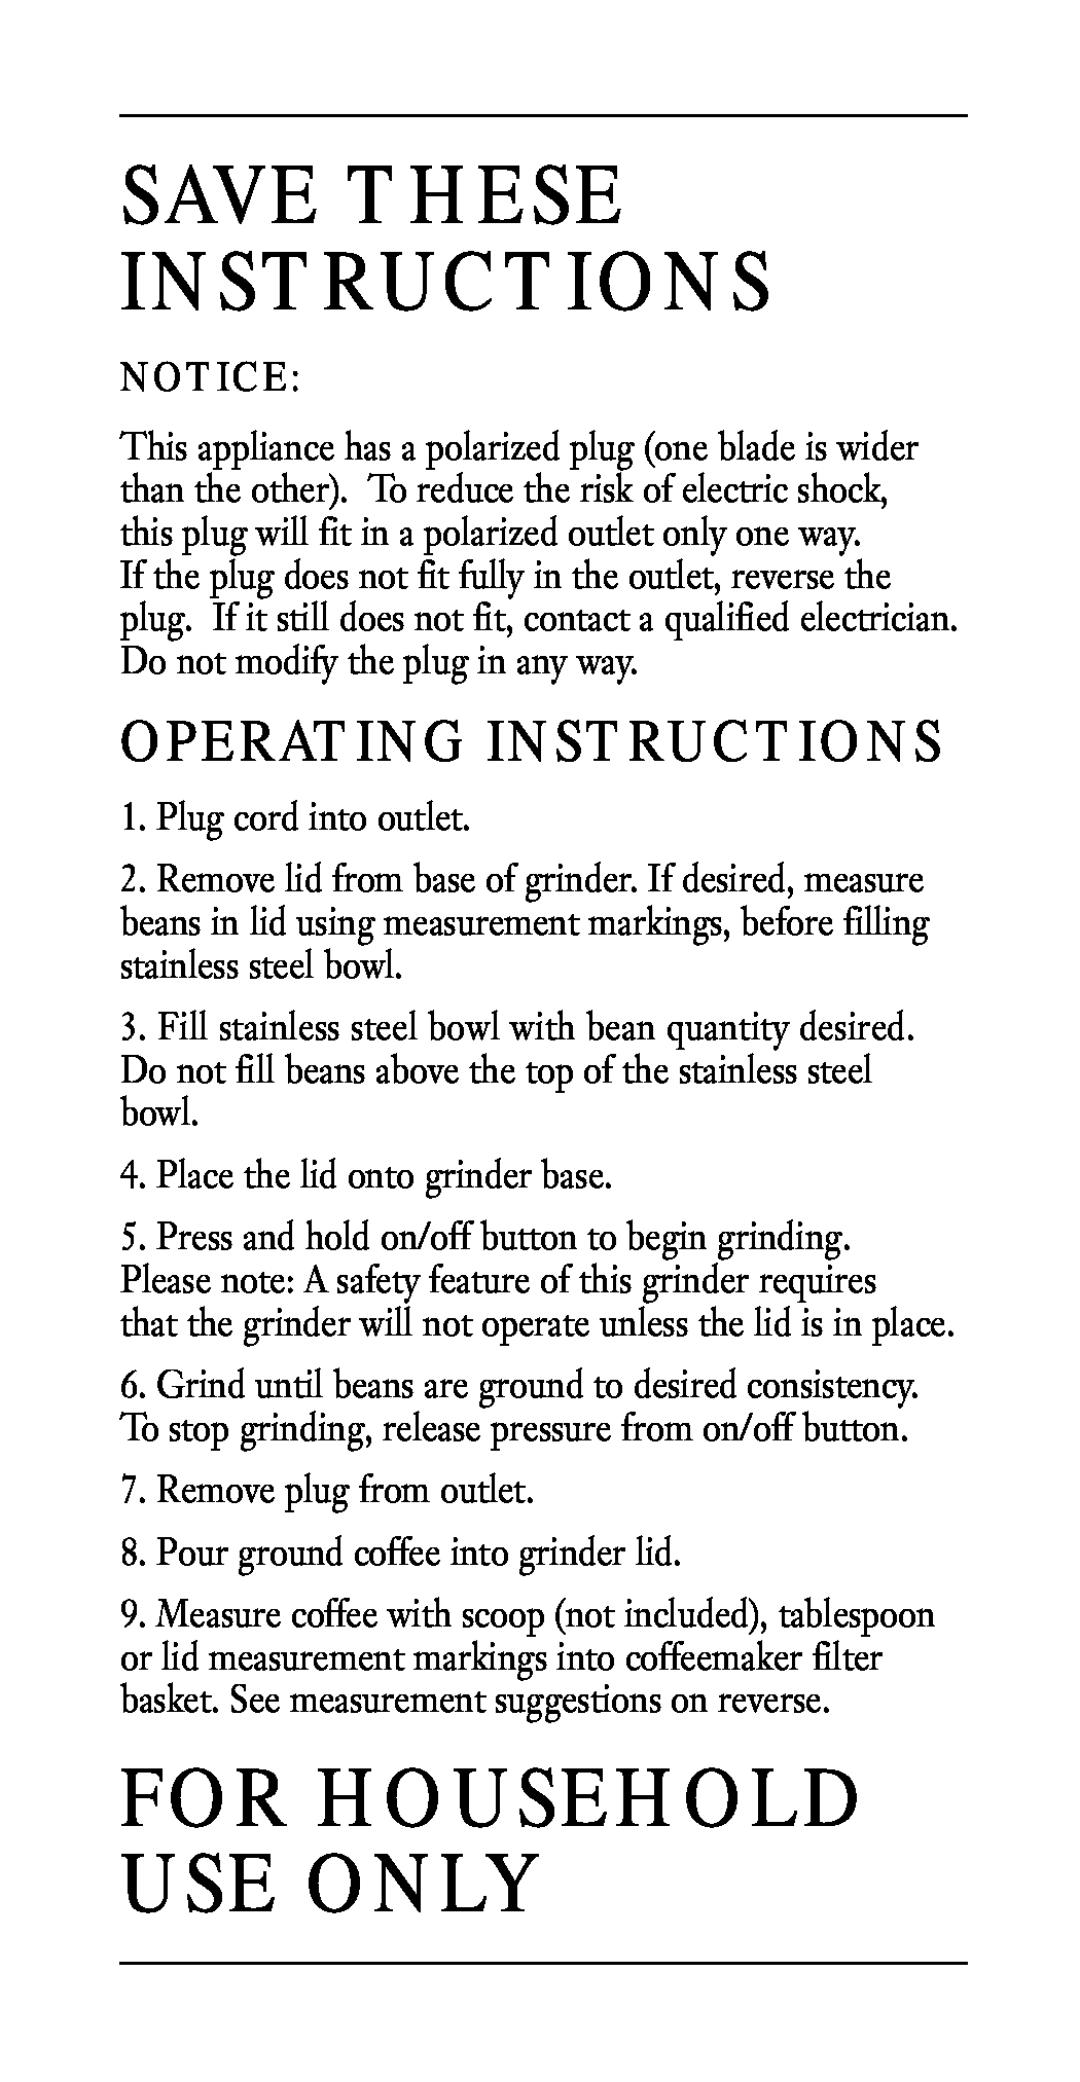 Cuisinart DCG-20BKN manual Save These Instructions, Operating Instructions, For Household Use Only 